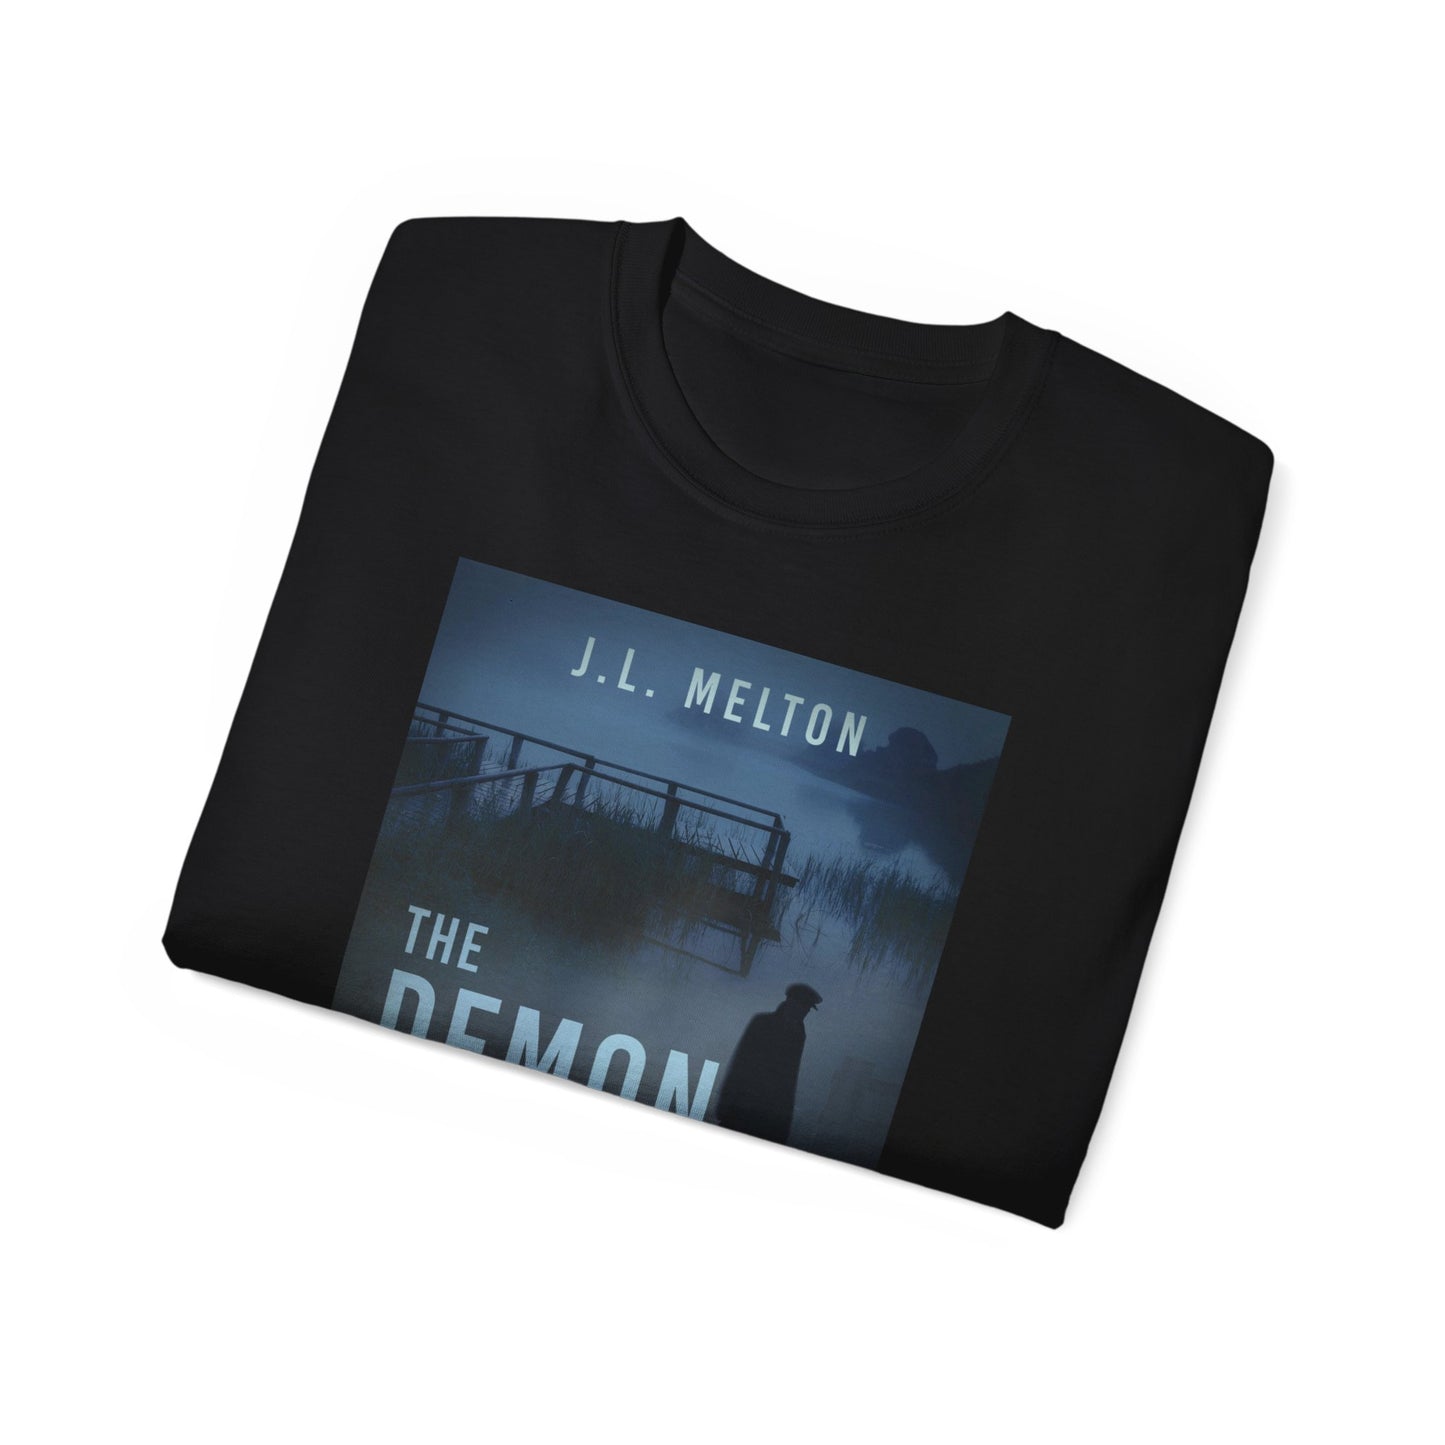 The Demon Of The Lake Murders - Unisex T-Shirt